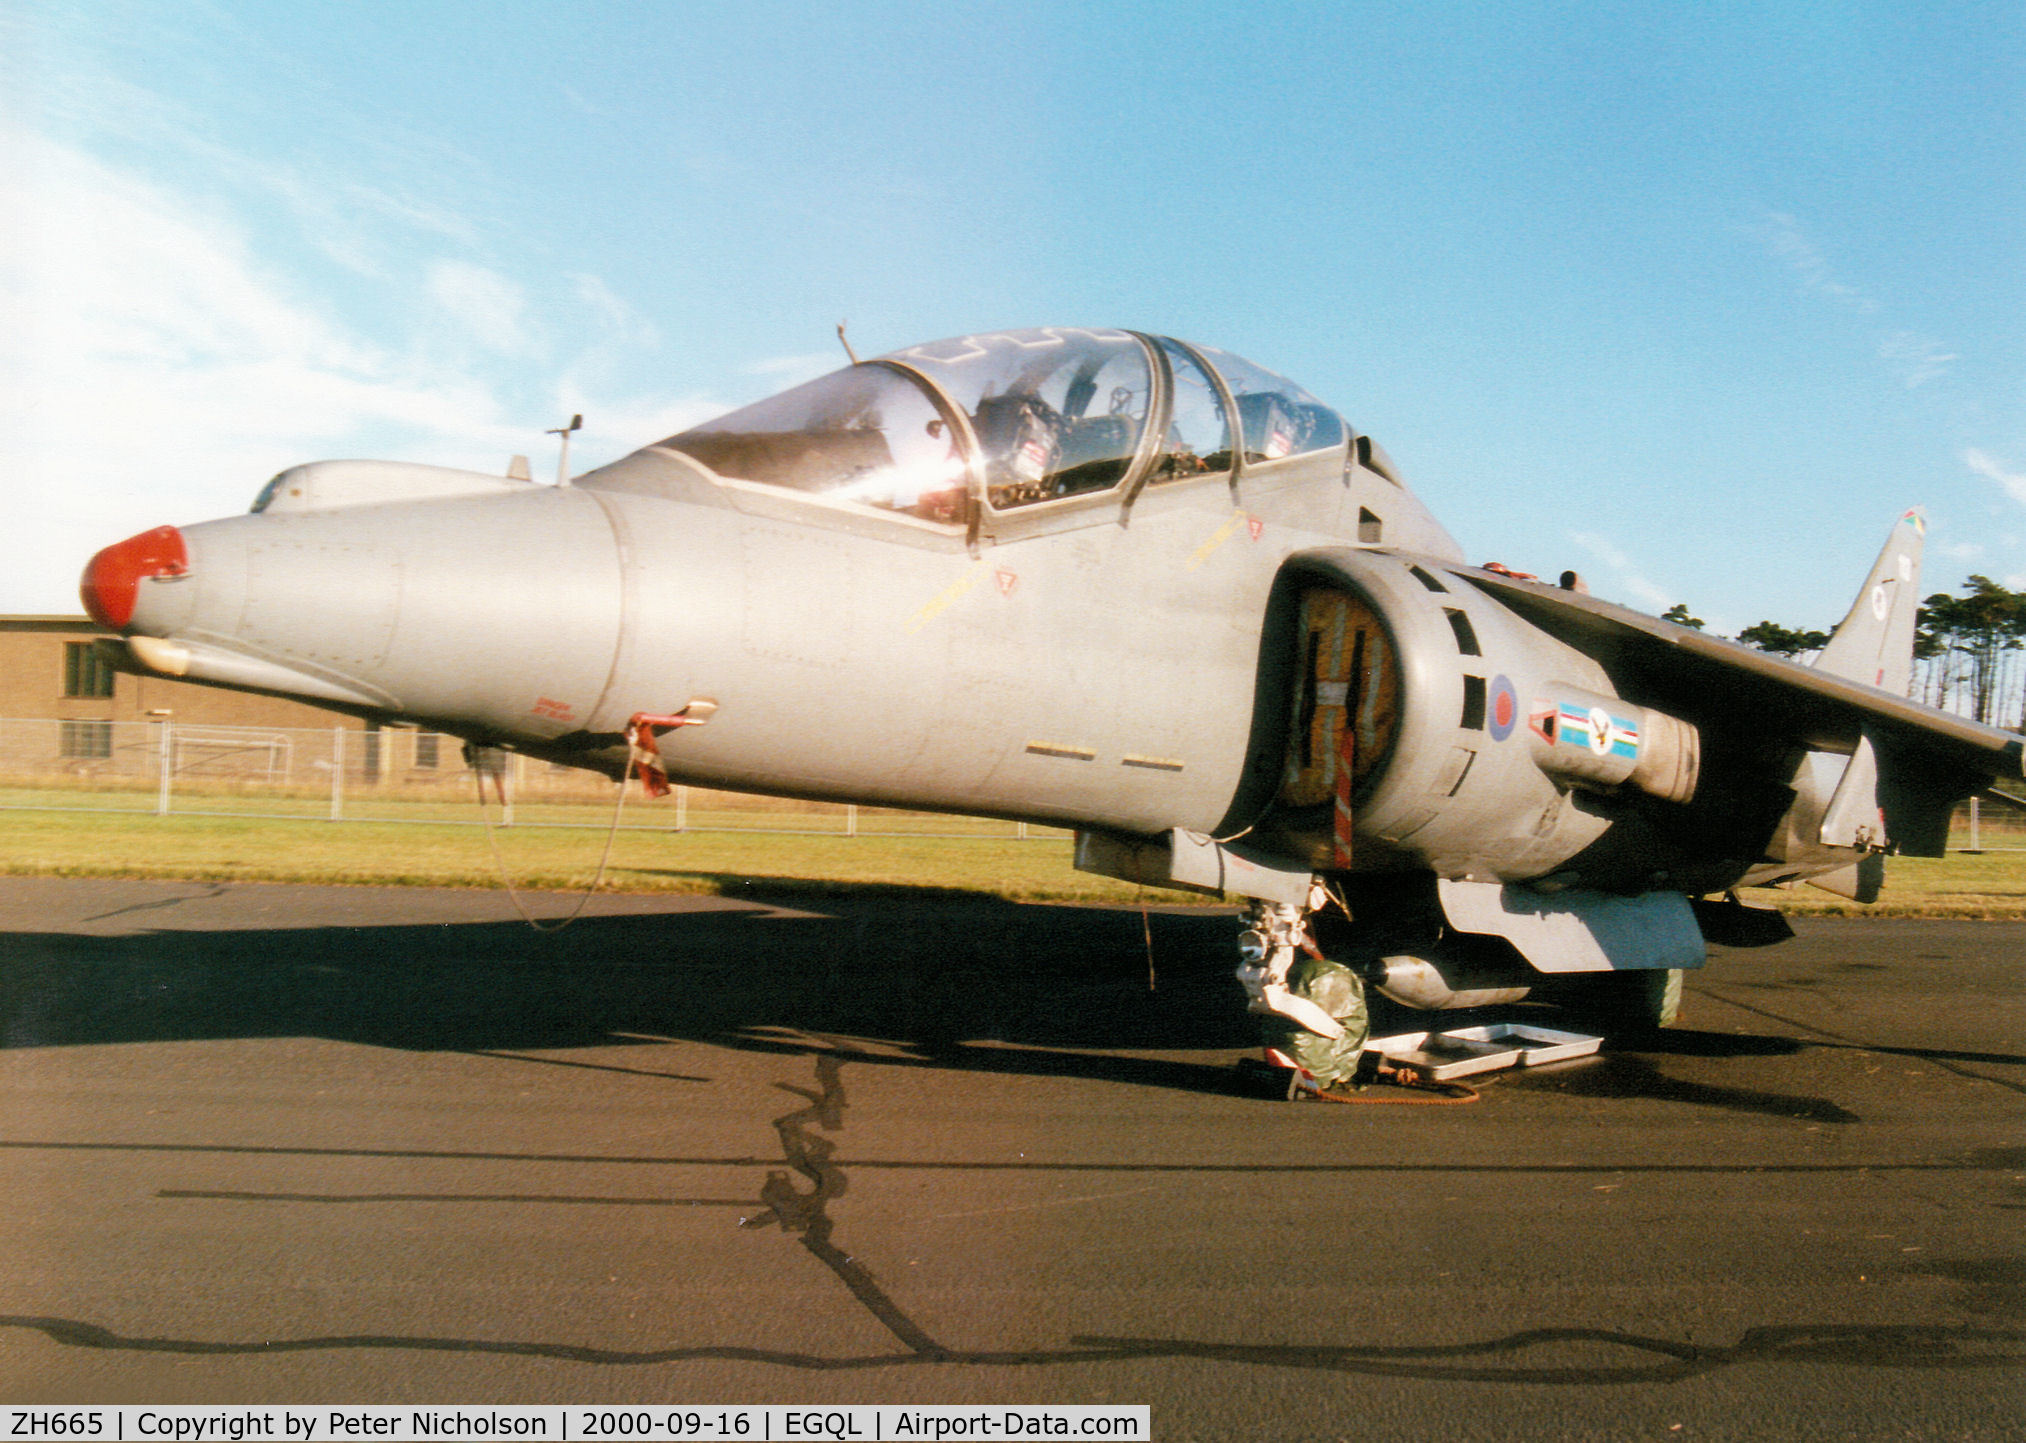 ZH665, 1995 British Aerospace Harrier T.10 C/N TX013, Harrier T.10, callsign Kestrel 1, of 20[Reserve] Squadron based at RAF Wittering on display at the 2000 RAF Leuchars Airshow.